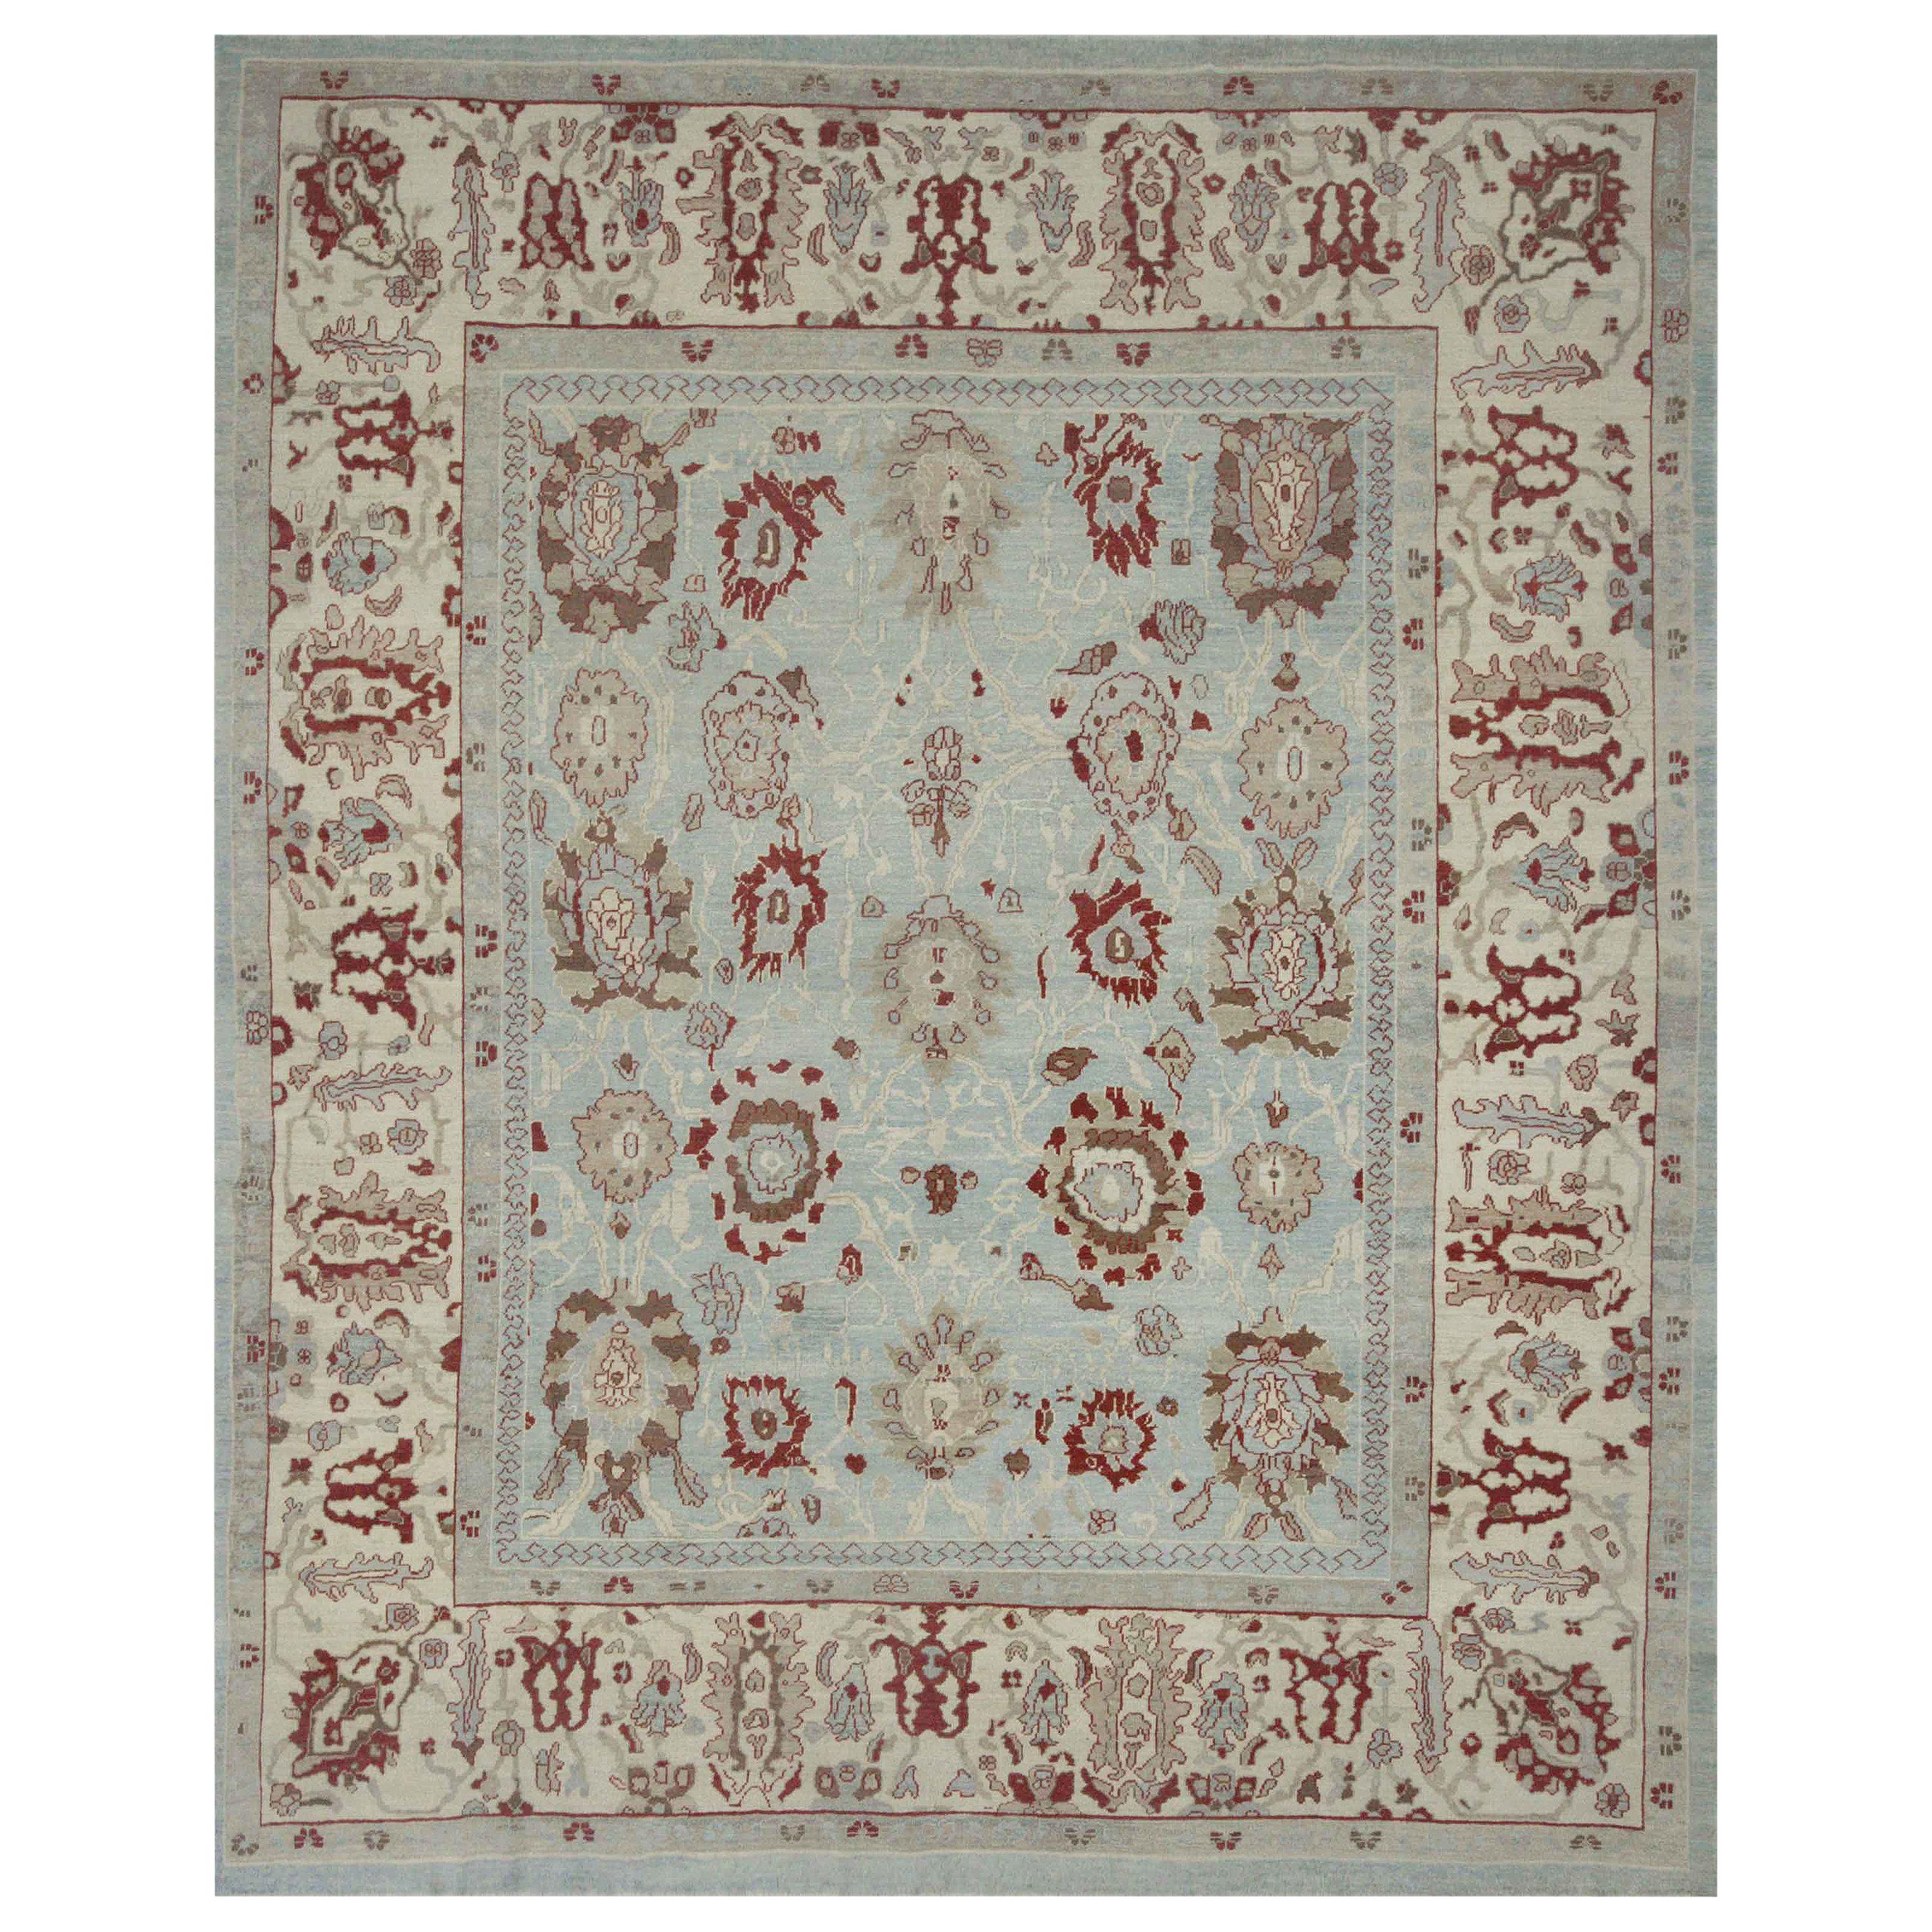 Modern Turkish Oushak Rug with Flower Details in Red on Blue & Ivory Field